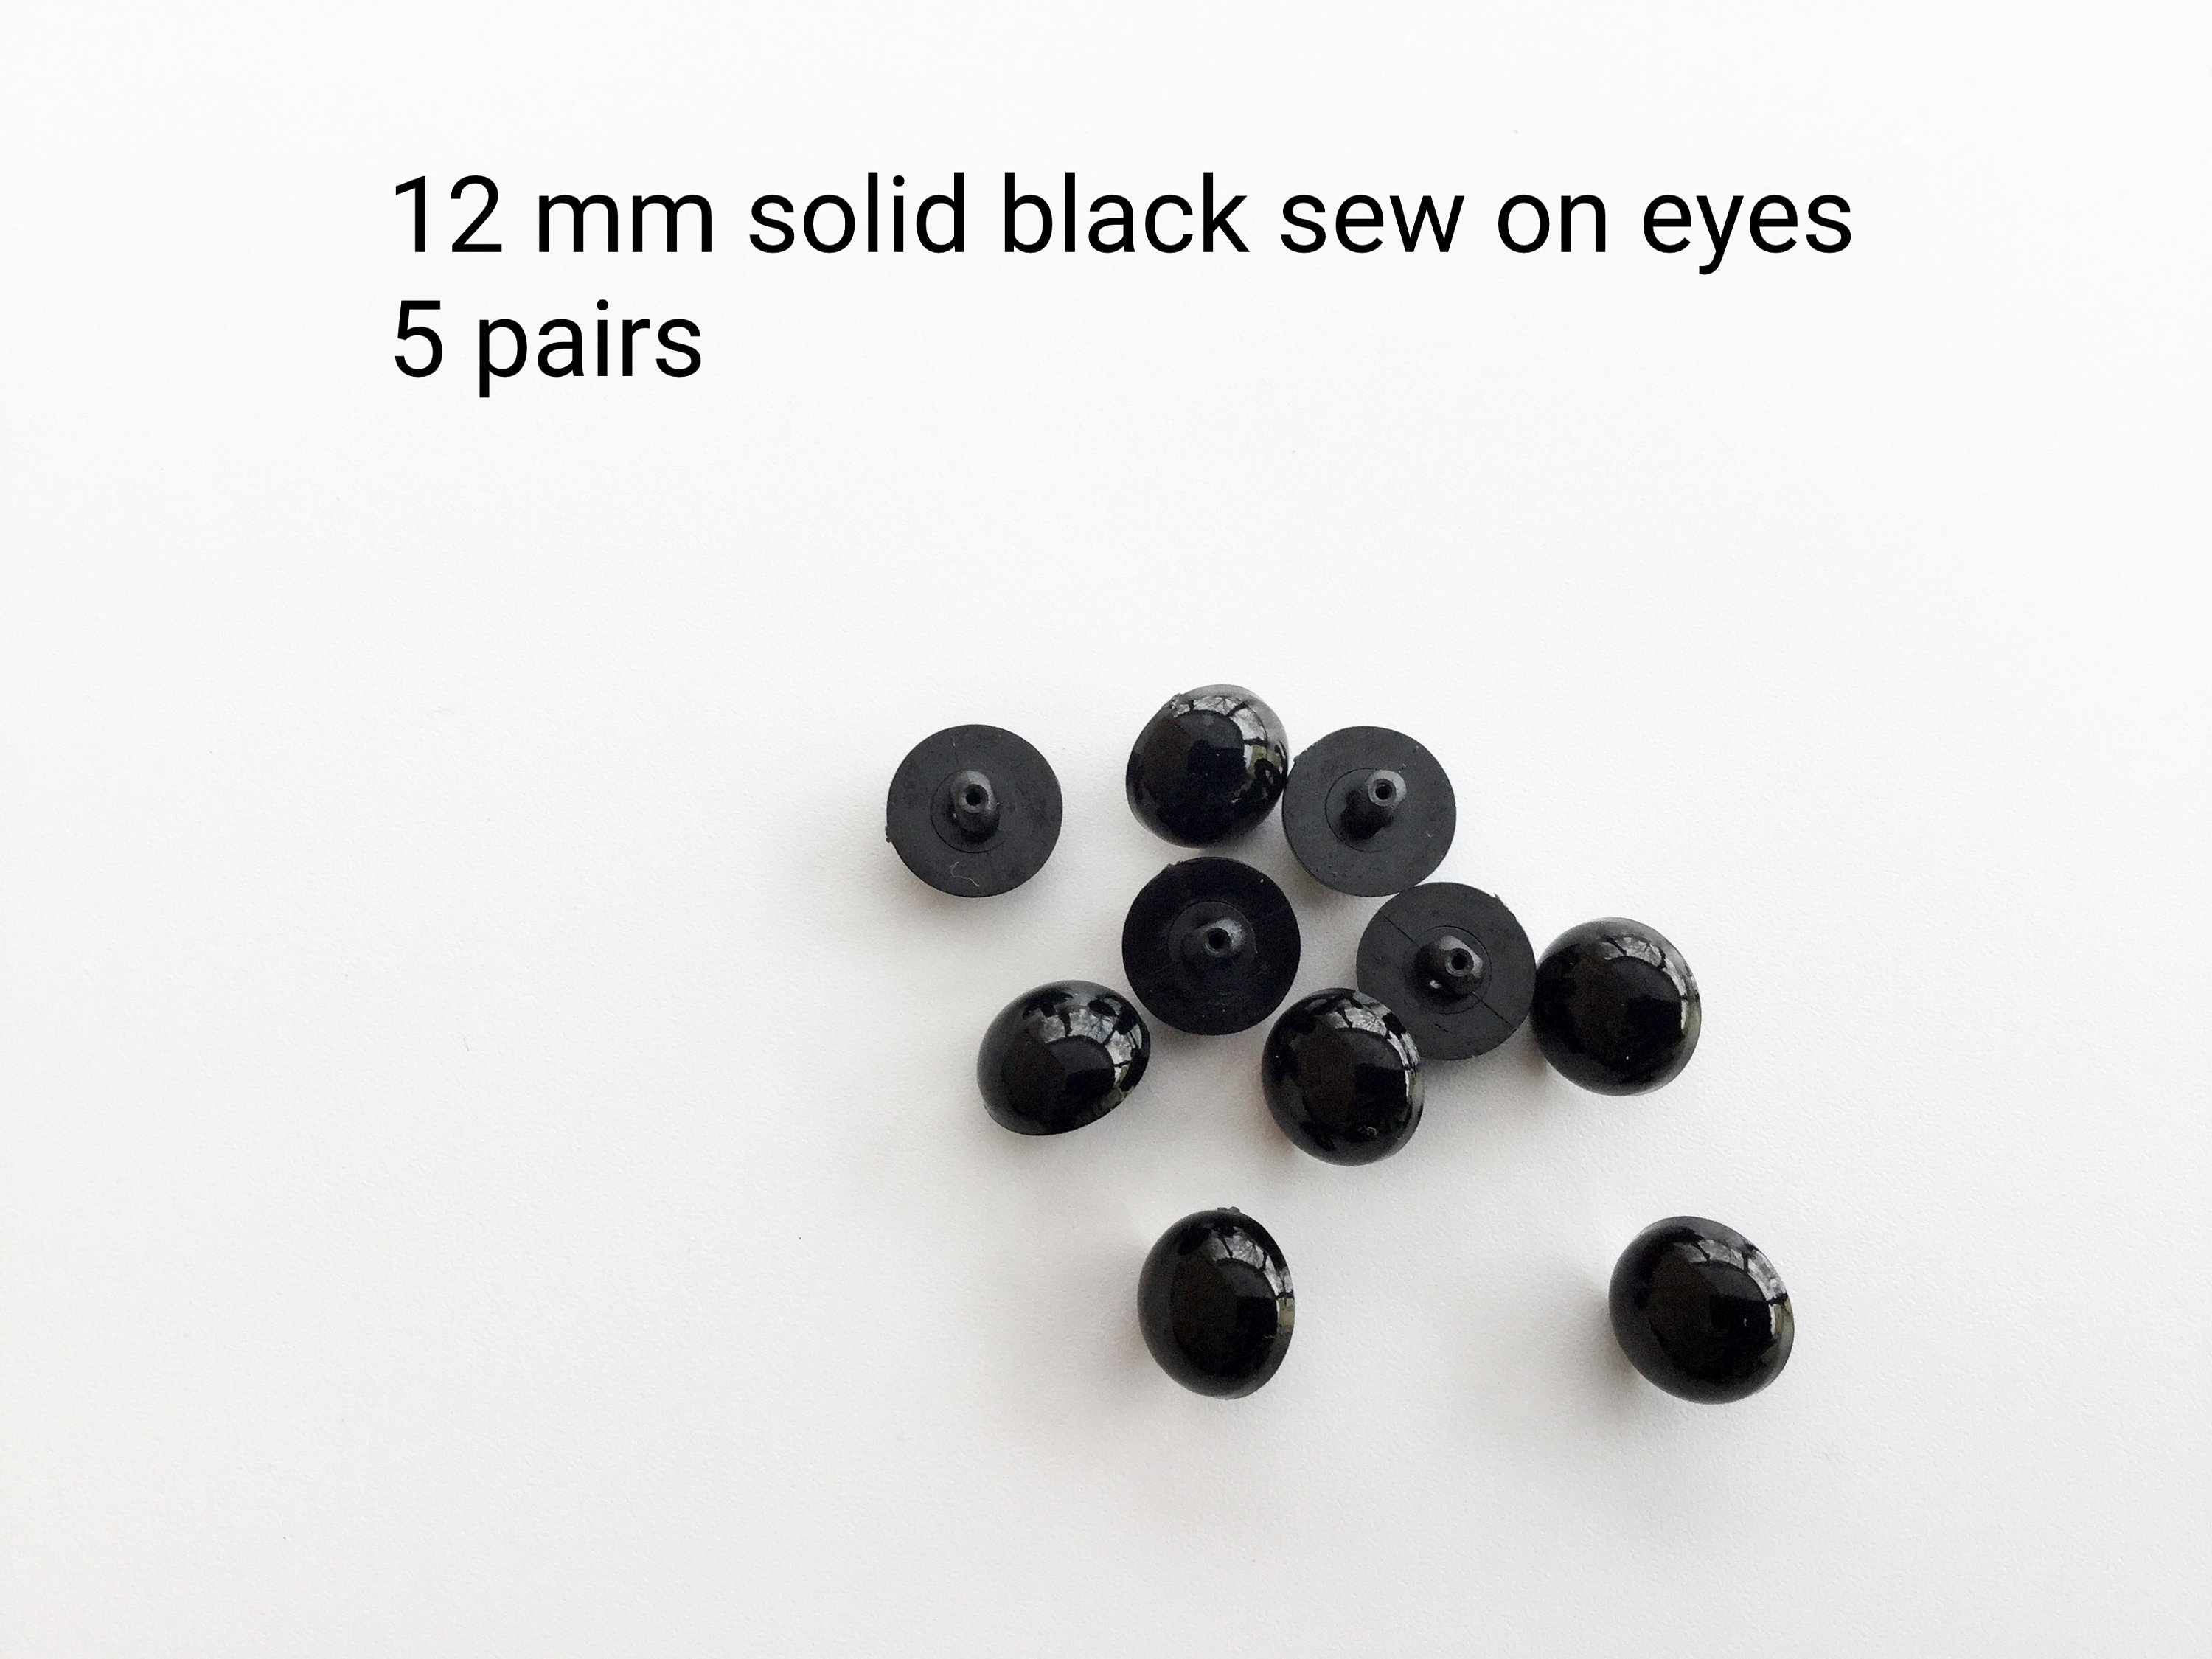 Black Safety Eyes 5, 10, 25 or 50 Pairs 4mm, 4.5mm, 5mm, 6mm, 7mm, 8mm,  9mm, 10.5mm, 12mm, 15mm for Amigurumi, Stuffed Animal, Plush 